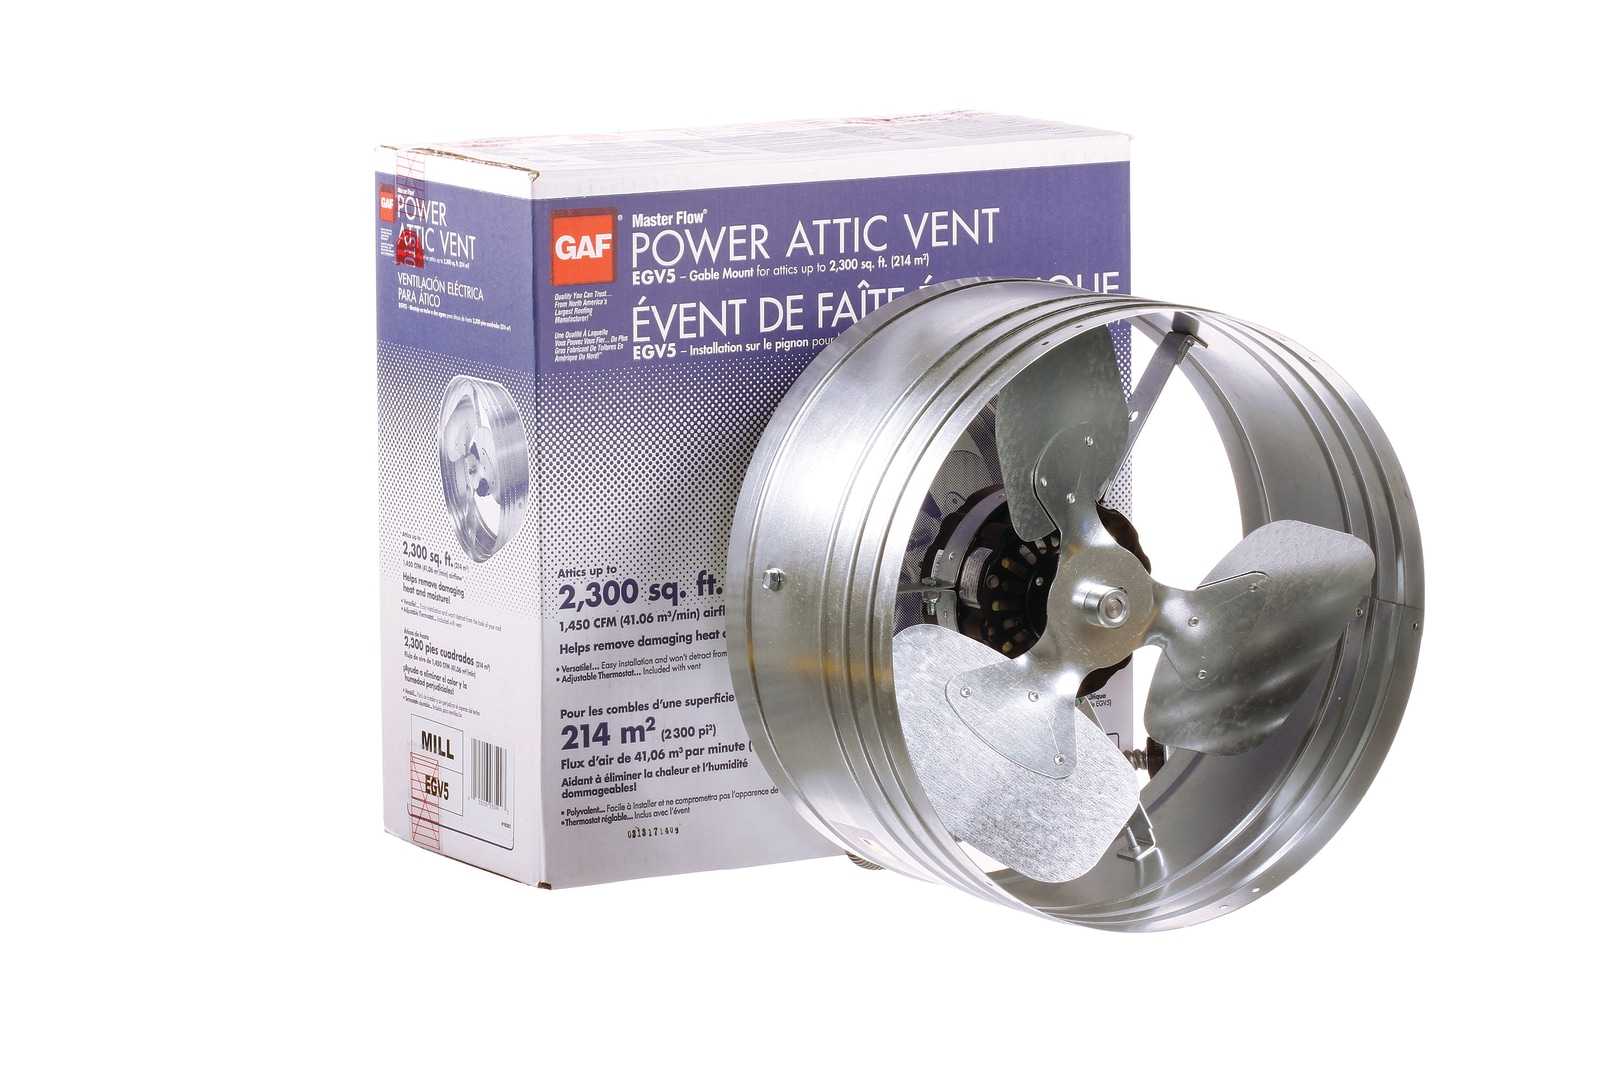 Master Flow 7 in. Appliance Vent Kit - Roof AVR7 - The Home Depot